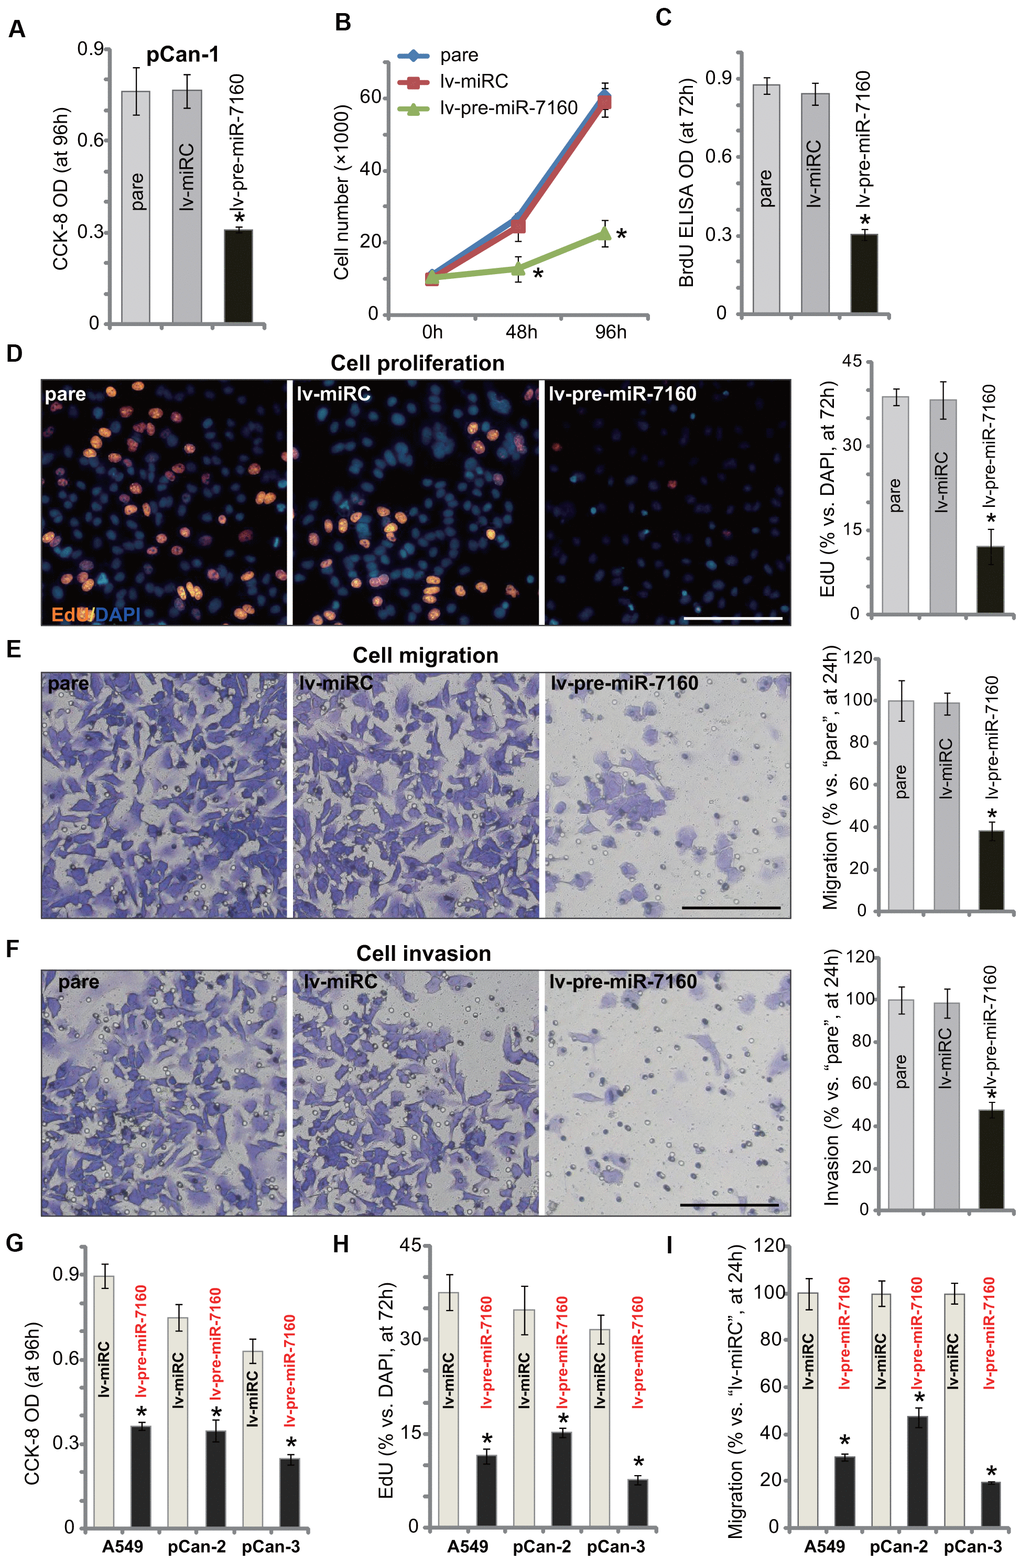 miR-7160 overexpression inhibits NSCLC cell growth, proliferation, migration and invasion. The primary NSCLC cells (pCan-1/pCan-2/pCan-3) or A549 cells, bearing the pre-miR-7160-expression lentiviral construct (“lv-pre-miR-7160”) or non-sense miRNA control lentiviral construct (“lv-miRC”), were cultured for applied time periods; Cellular functions, including viability (A, G), growth (B), proliferation (C, D, H), migration (E, I) and invasion (F) were tested by the assays mentioned in the text, with results quantified. Data were presented as mean ± SD (n=5), and results normalized. *PD–F).